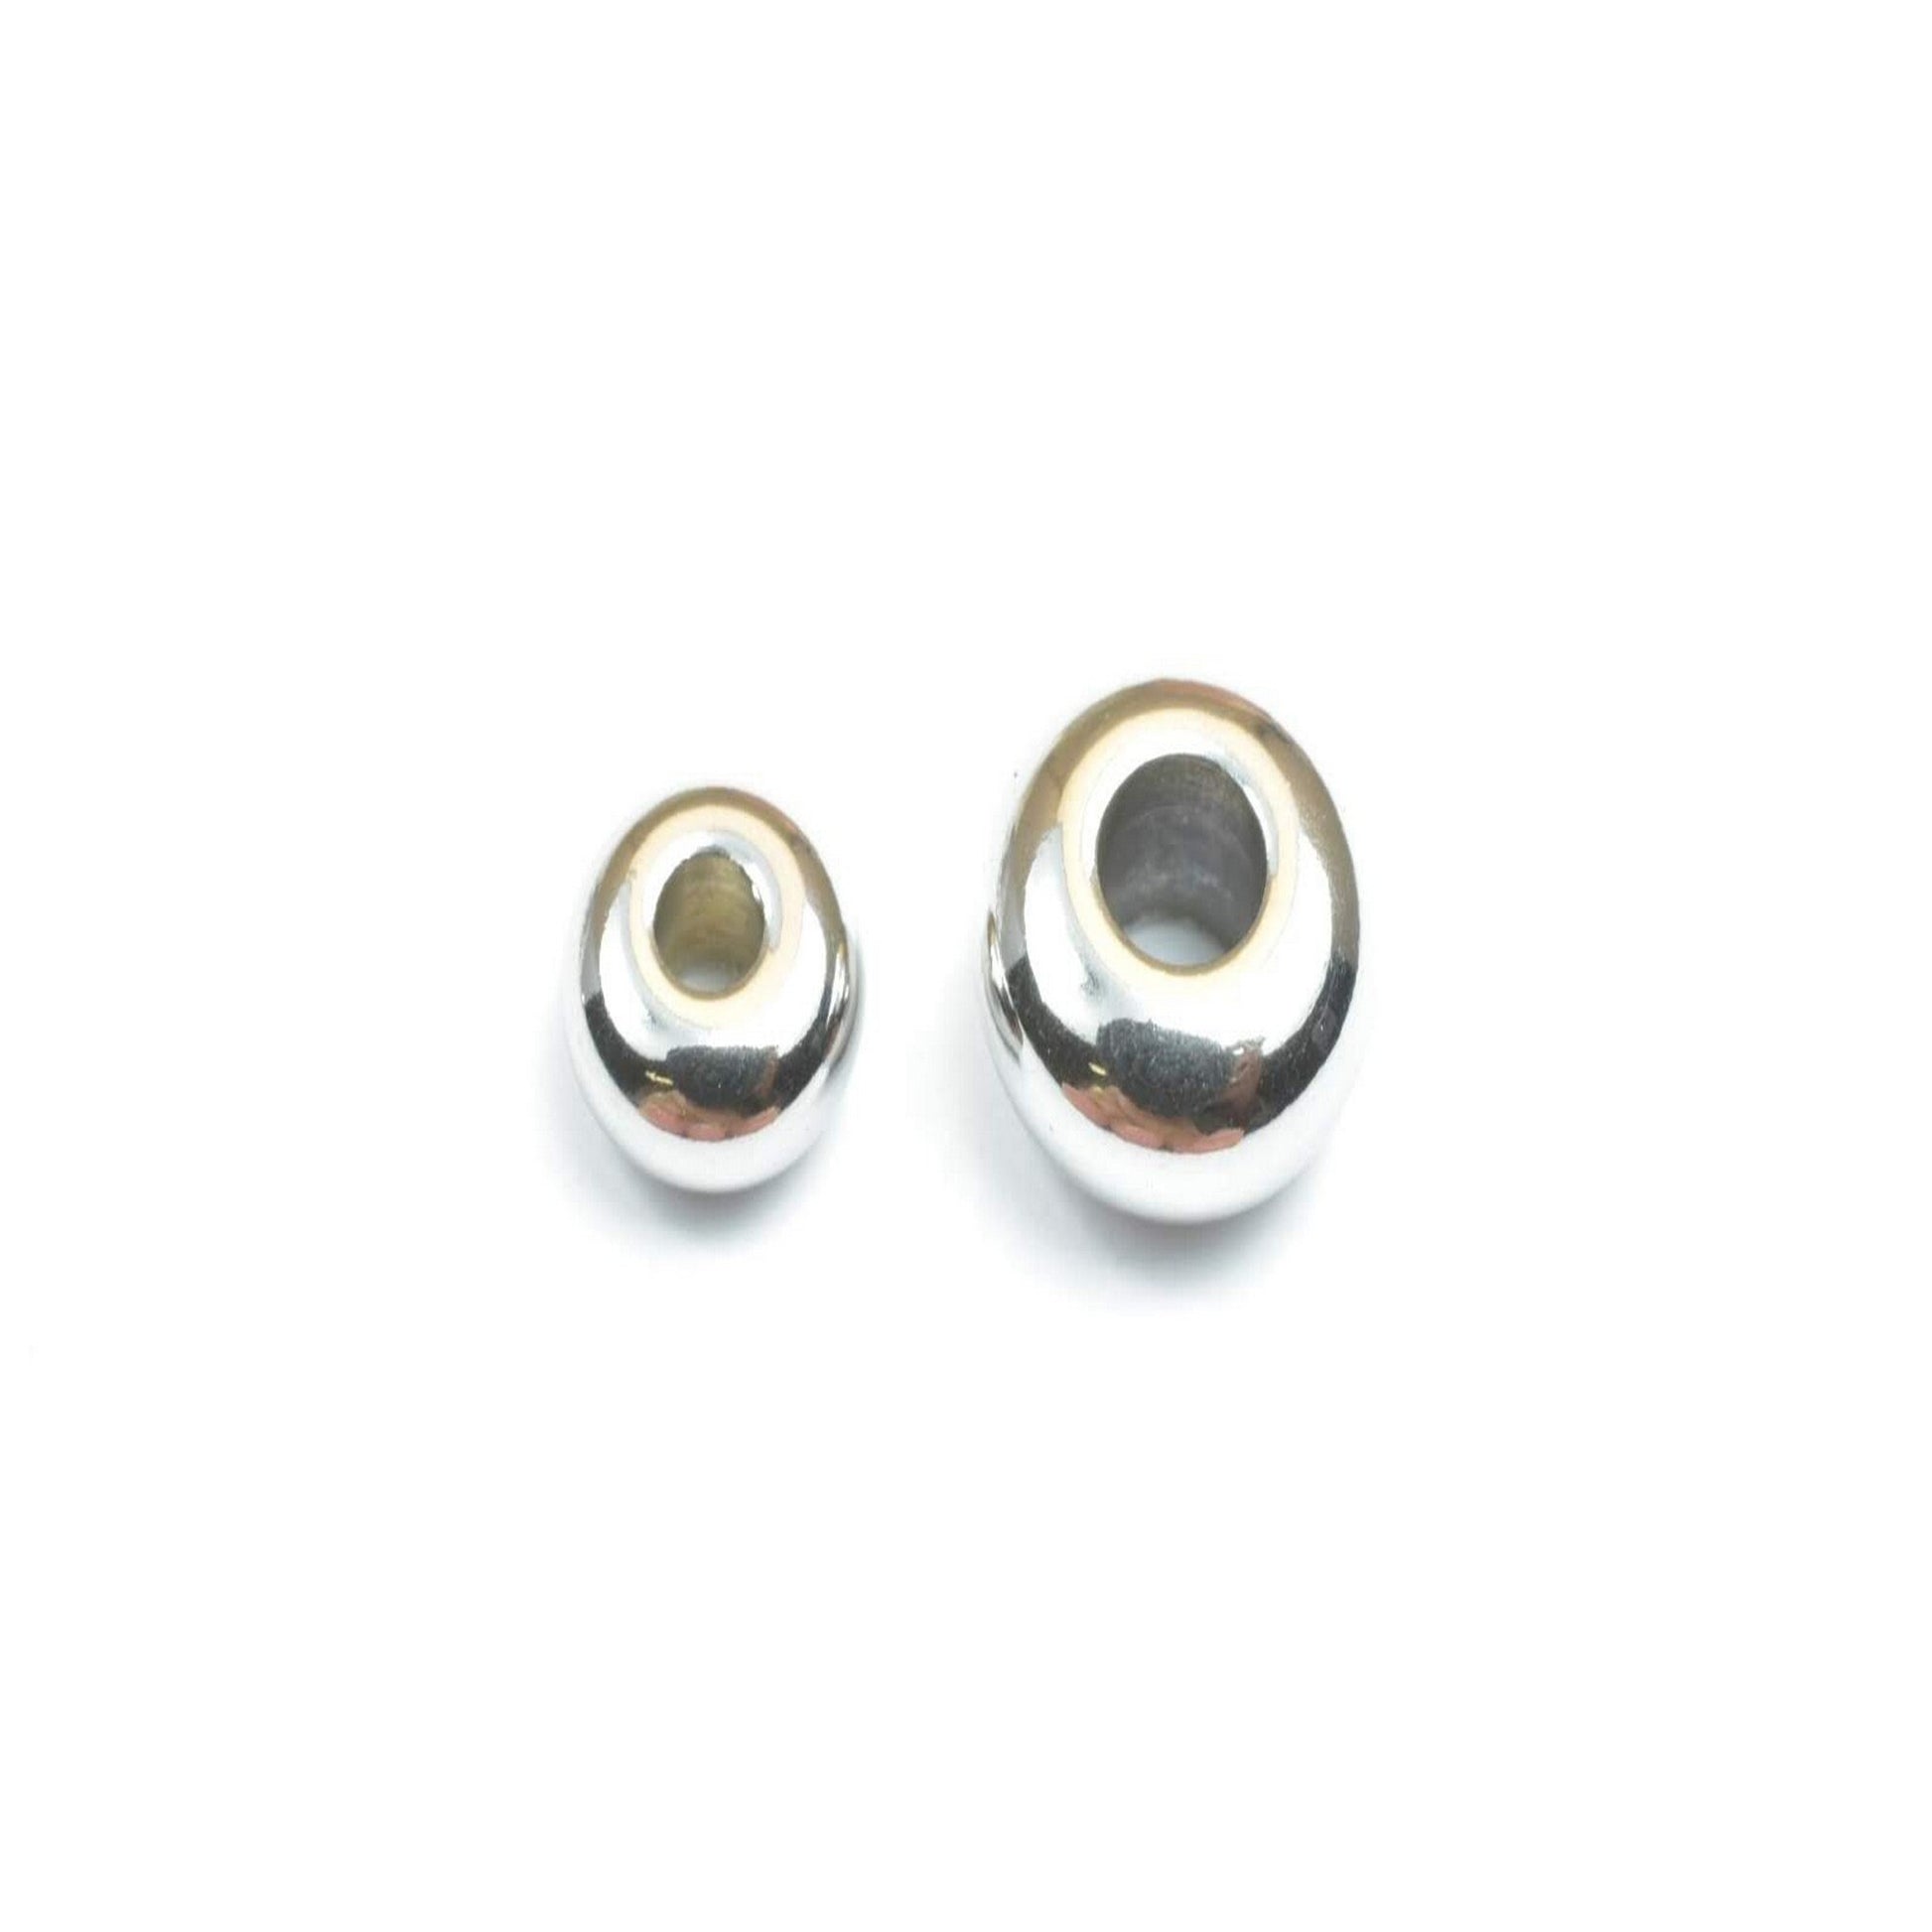 Stainless Steel Rondel Plain Spacer Beads Size 6x3mm, 8x4mm Jewelry Finding Supply For Jewelry Making